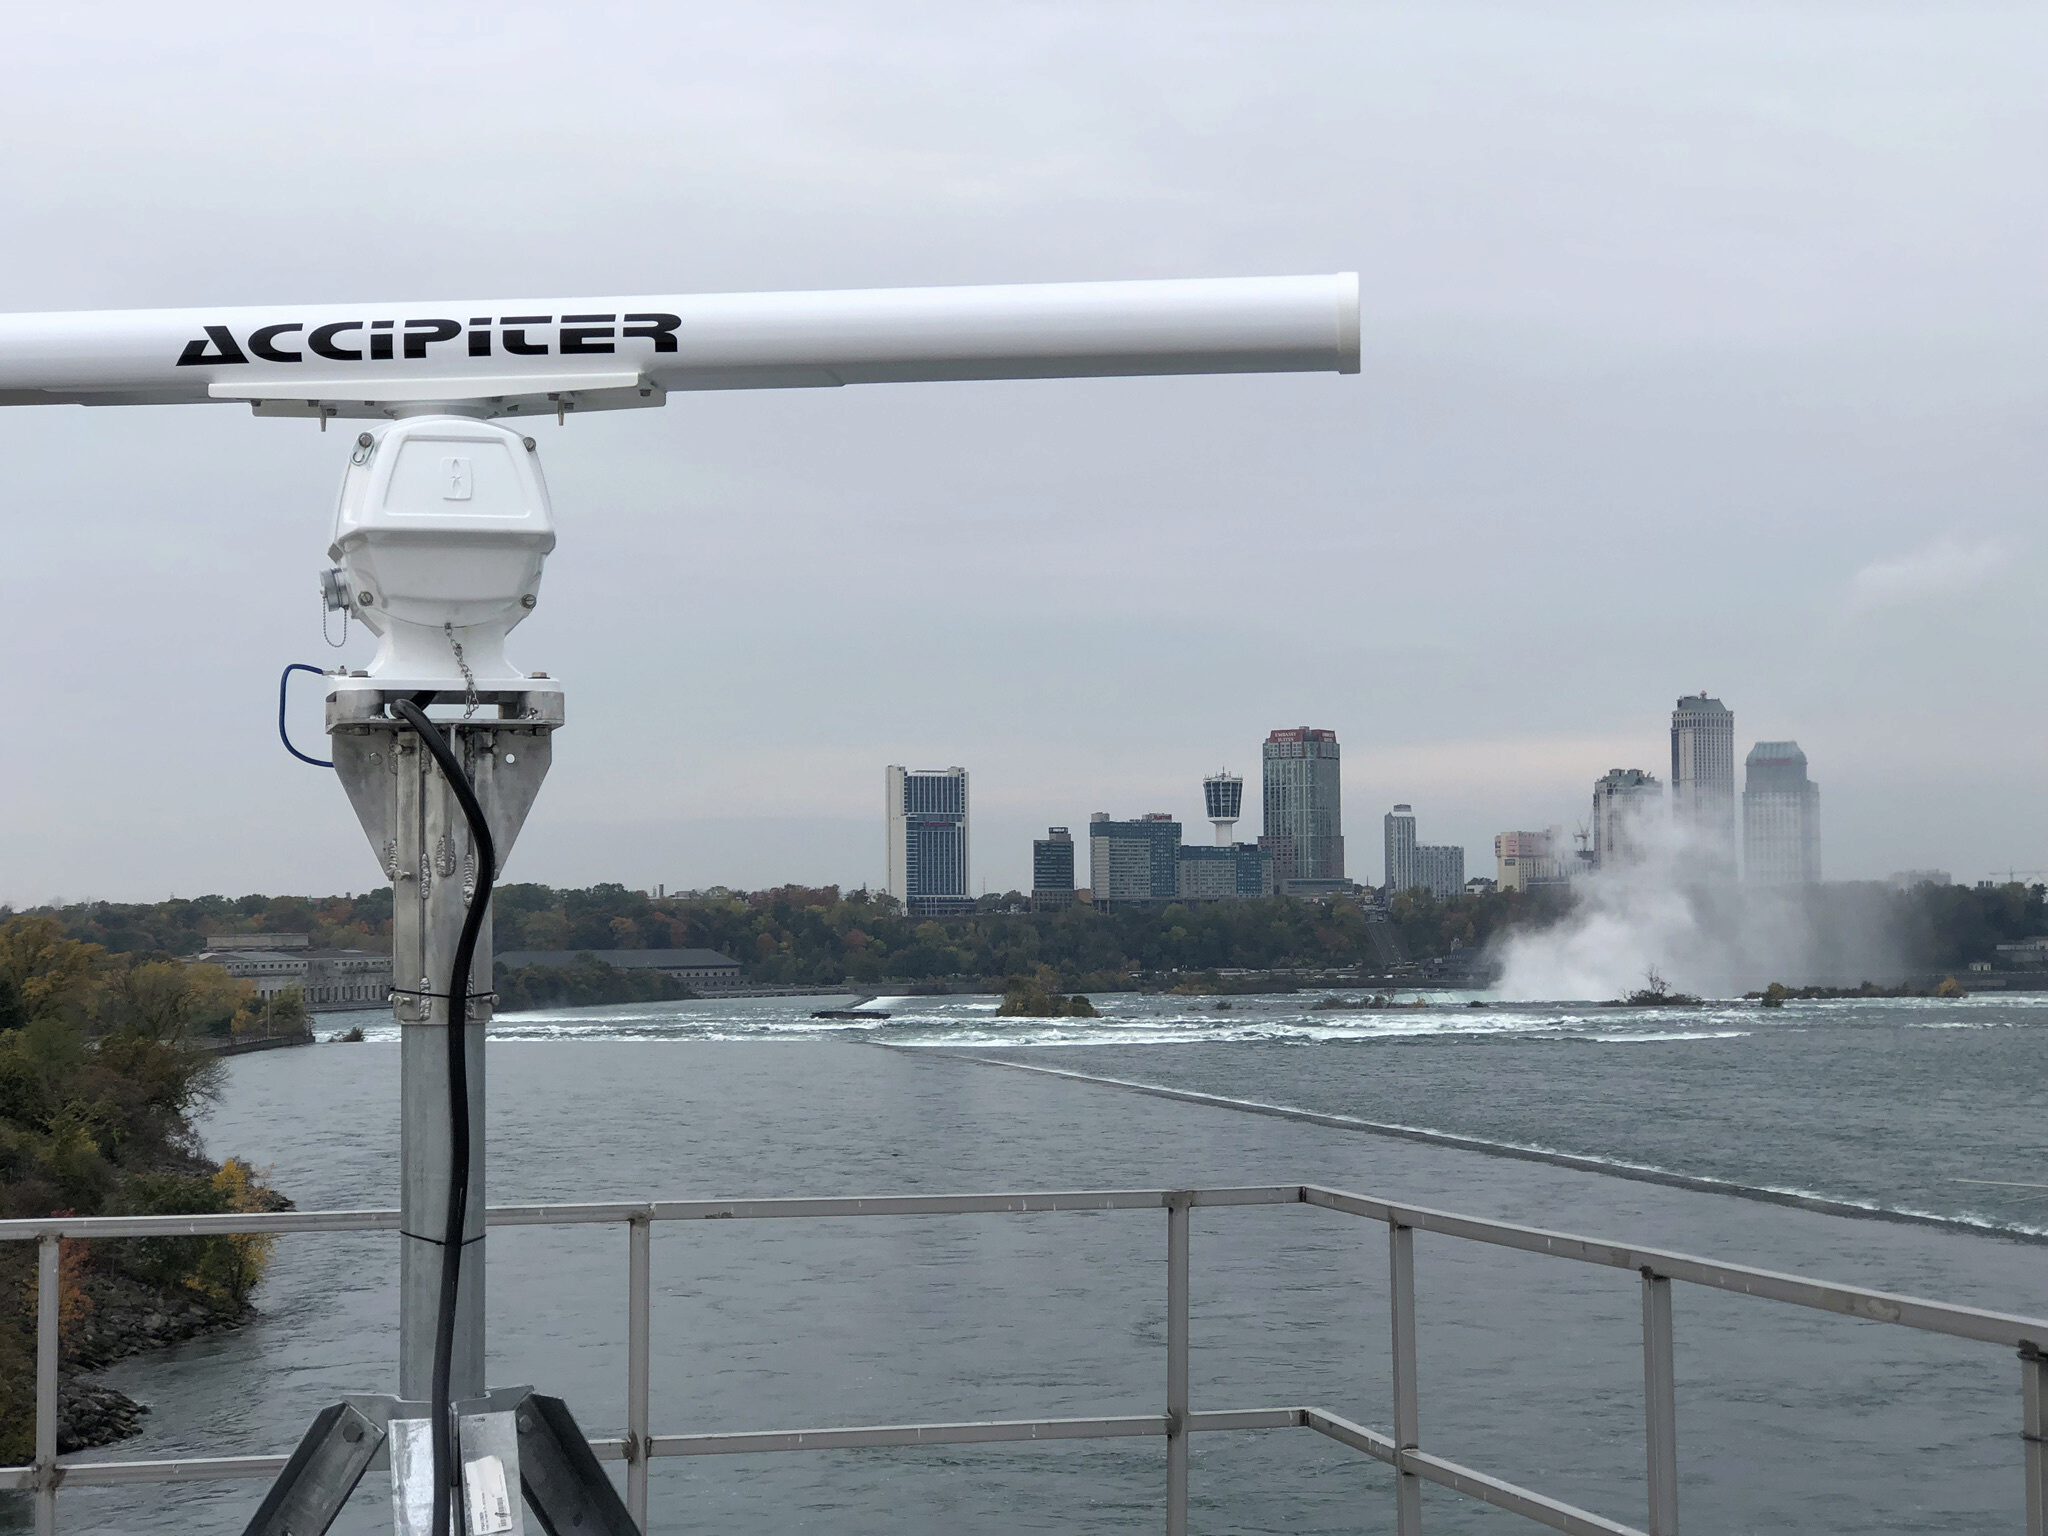 OPG and NYPA have installed a new public safety detection and alerting system on the Niagara River.